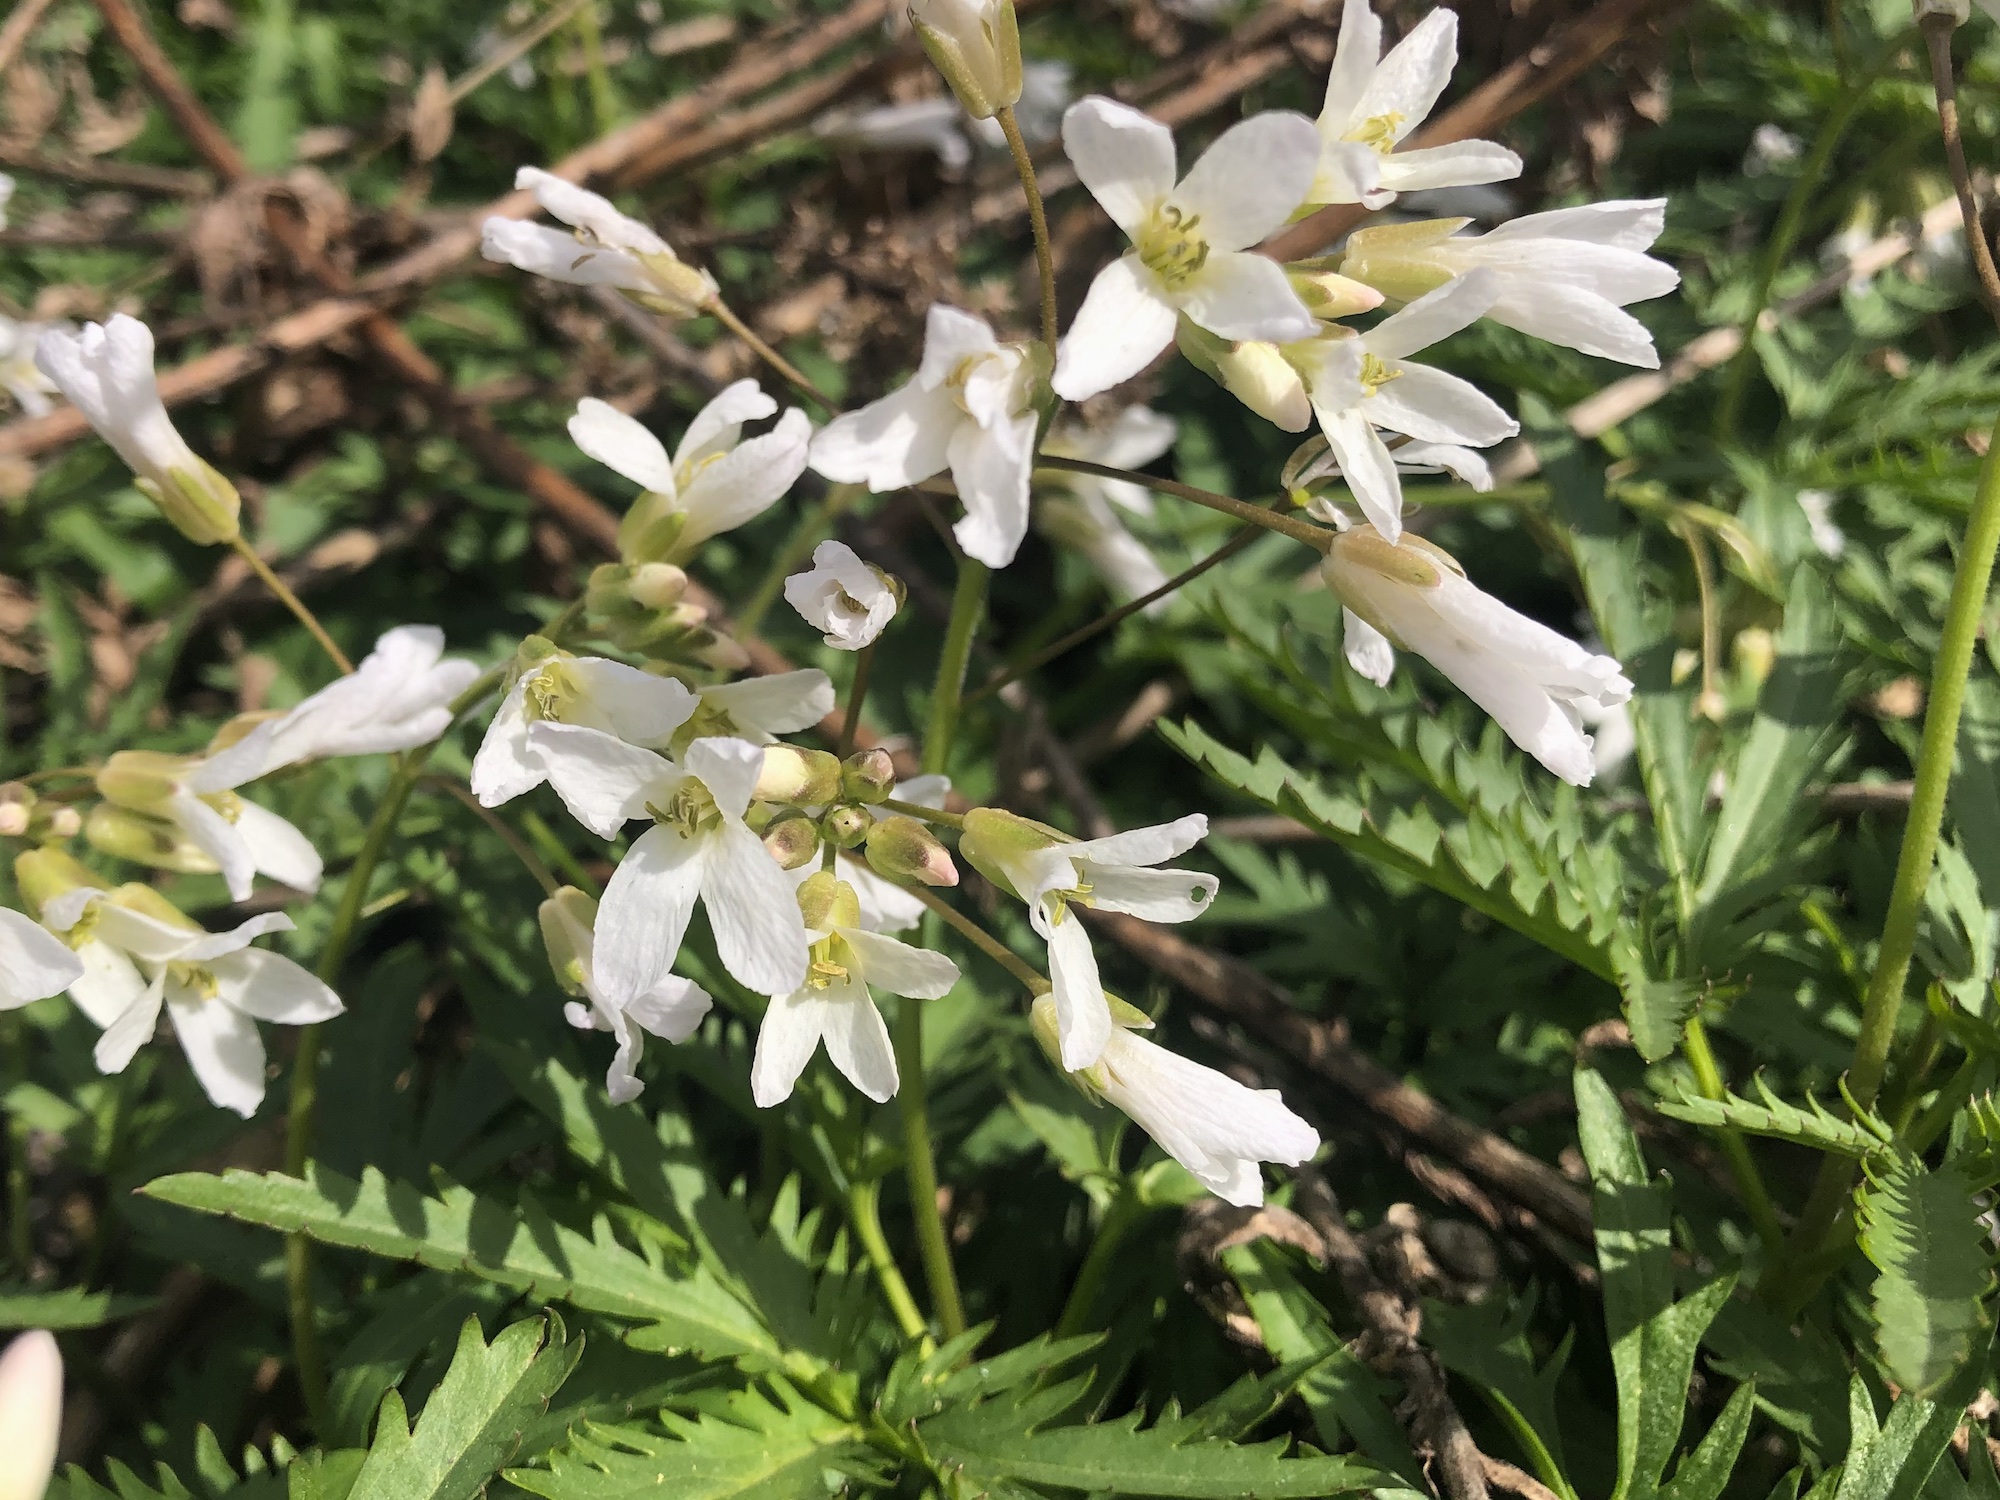 Cutleaf Toothwort in Oak Savanna by Council Ring in Madison, Wisconsin on April 20, 2020.